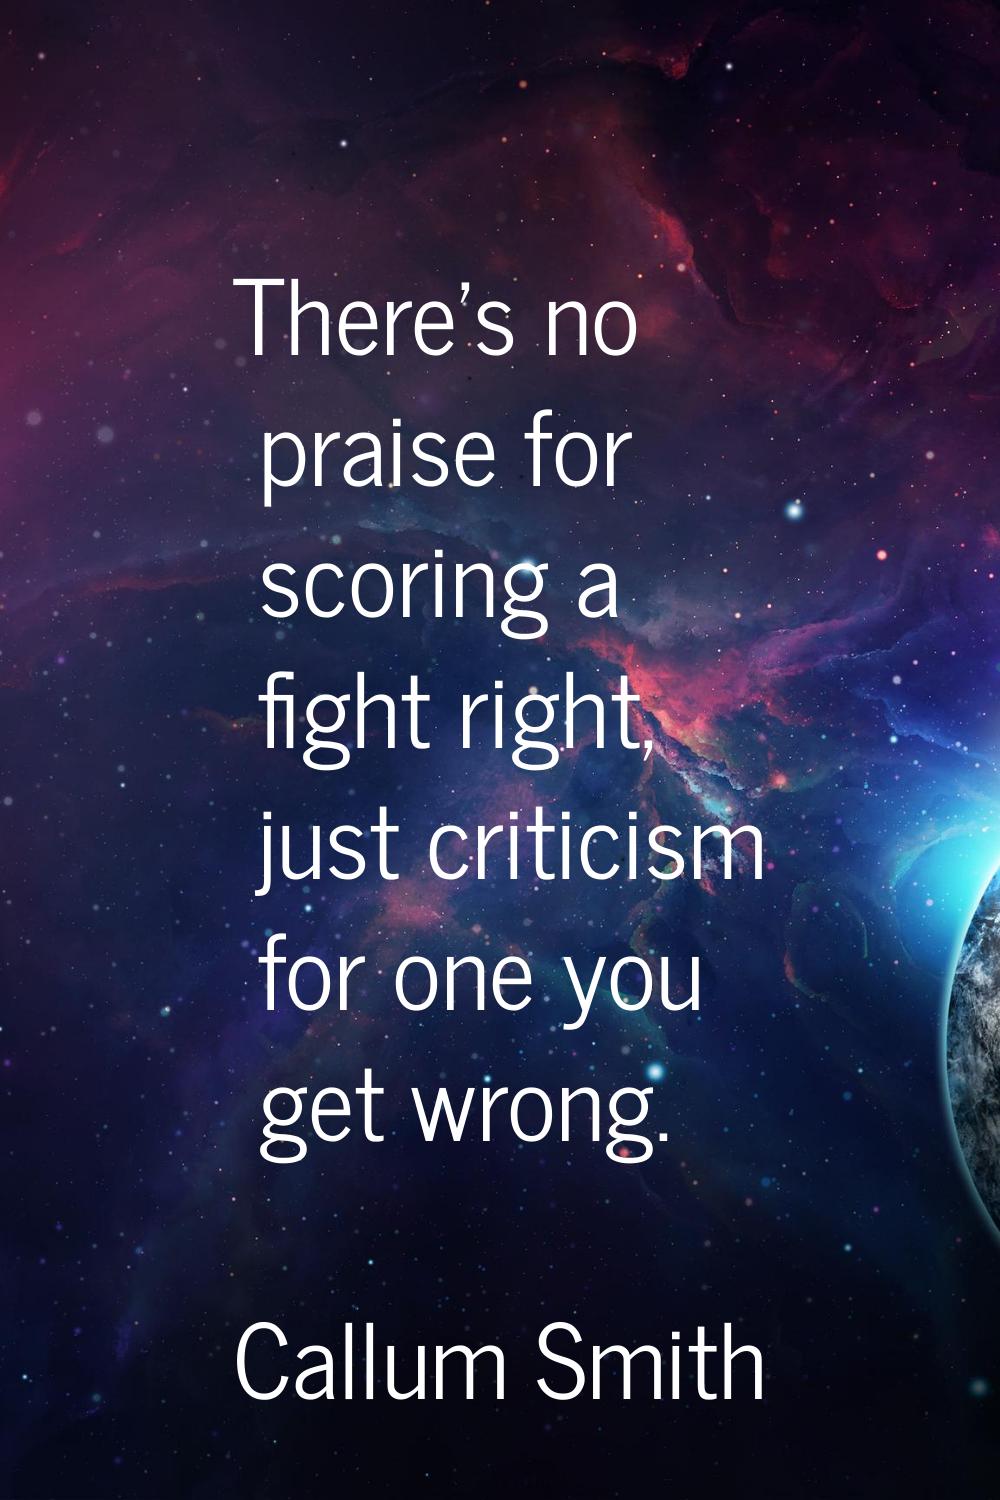 There's no praise for scoring a fight right, just criticism for one you get wrong.